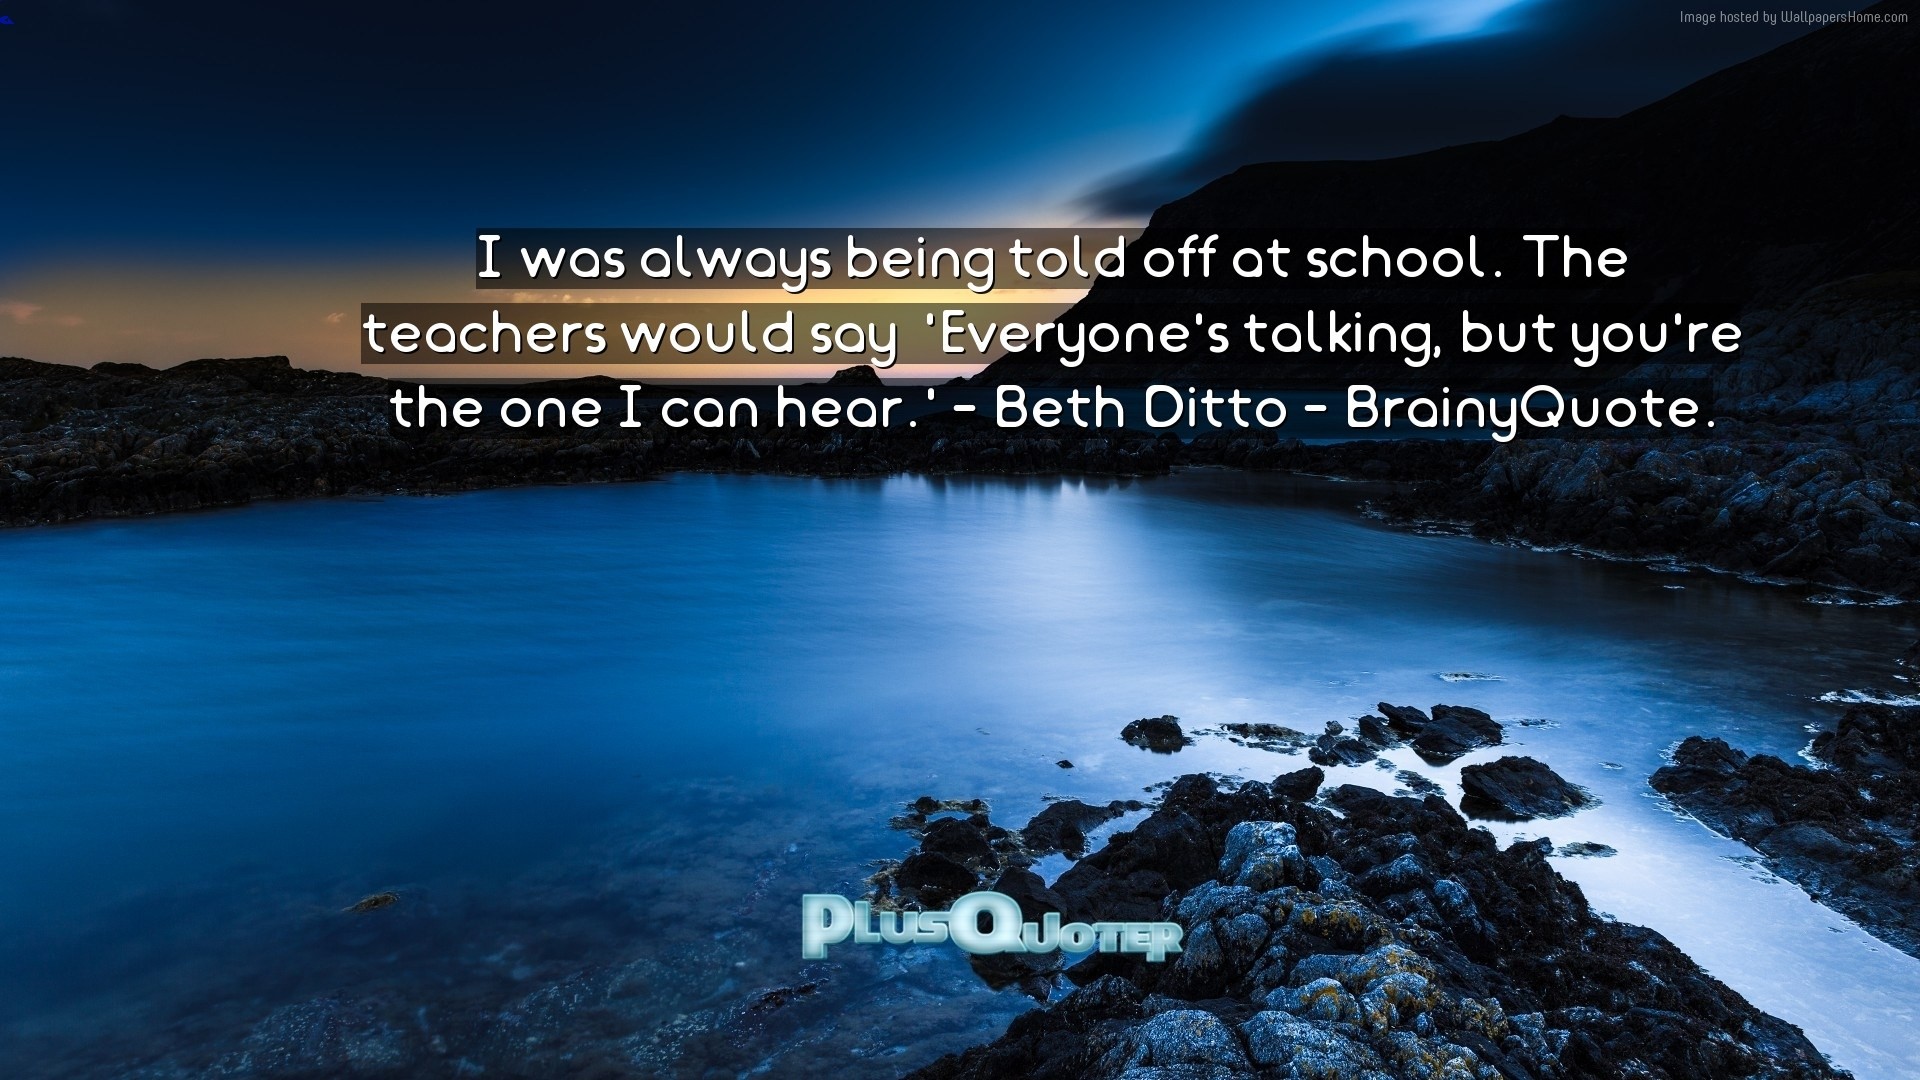 1920x1080 Download Wallpaper with inspirational Quotes- "I was always being told off  at school.